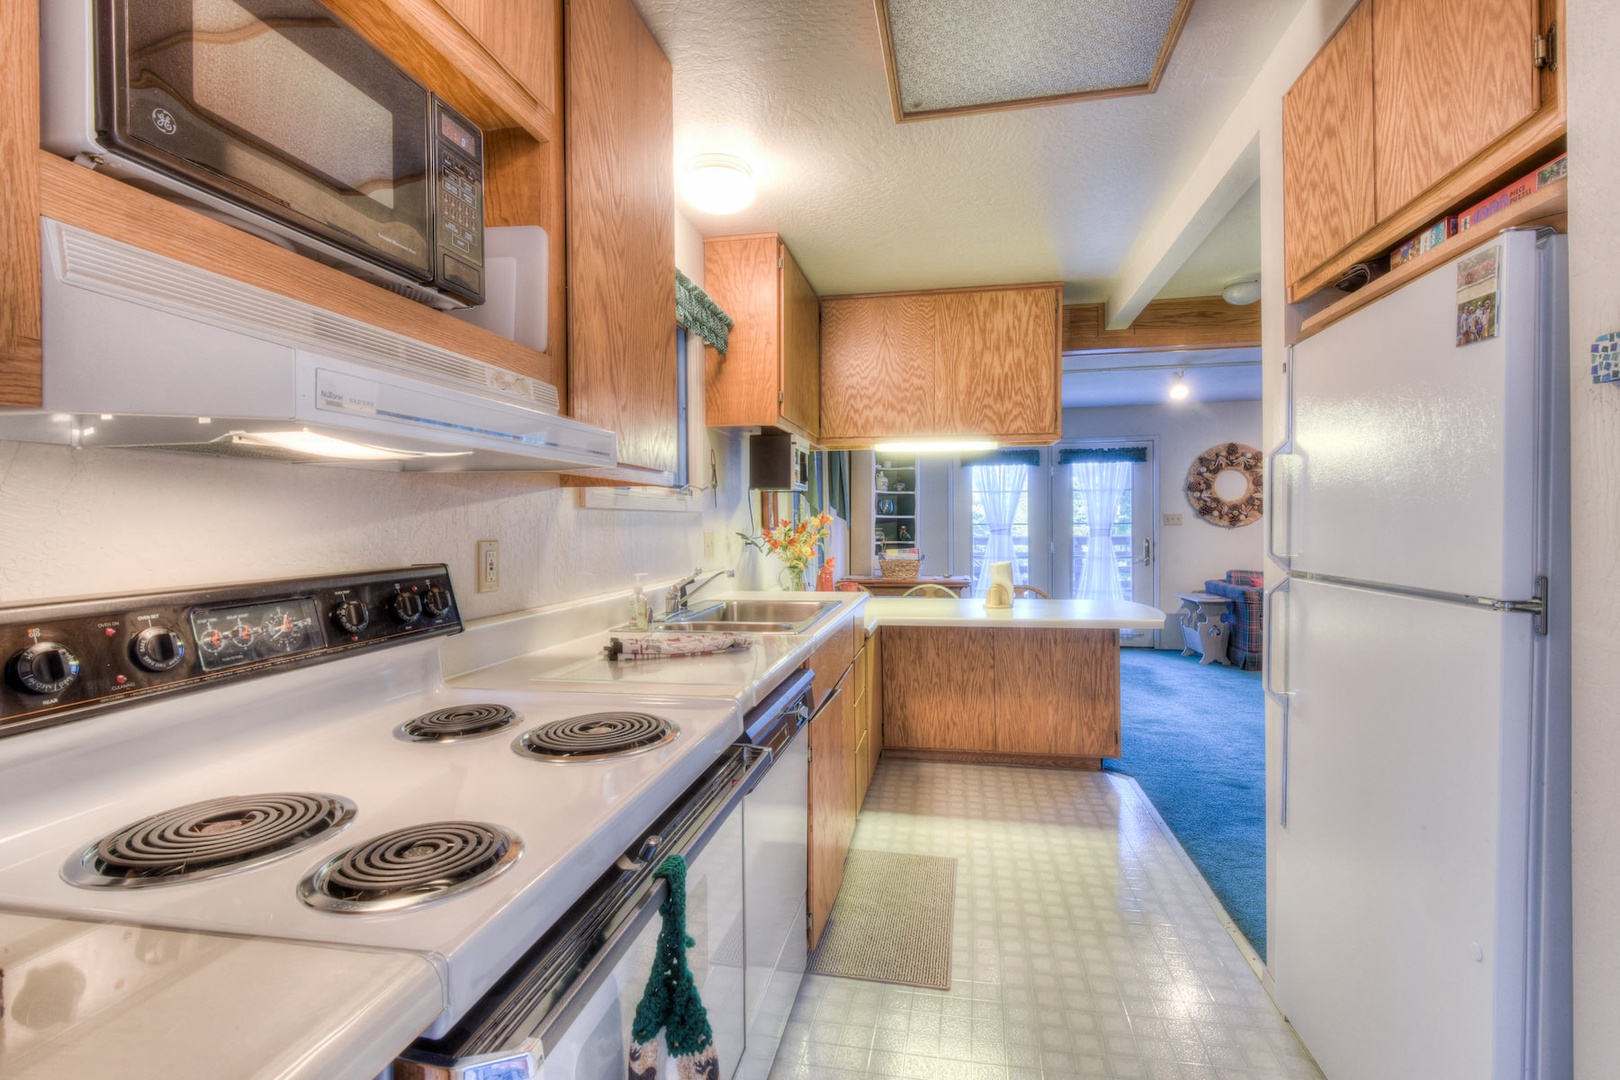 Full kitchen w/ toaster, drip coffee maker, blender, and more!